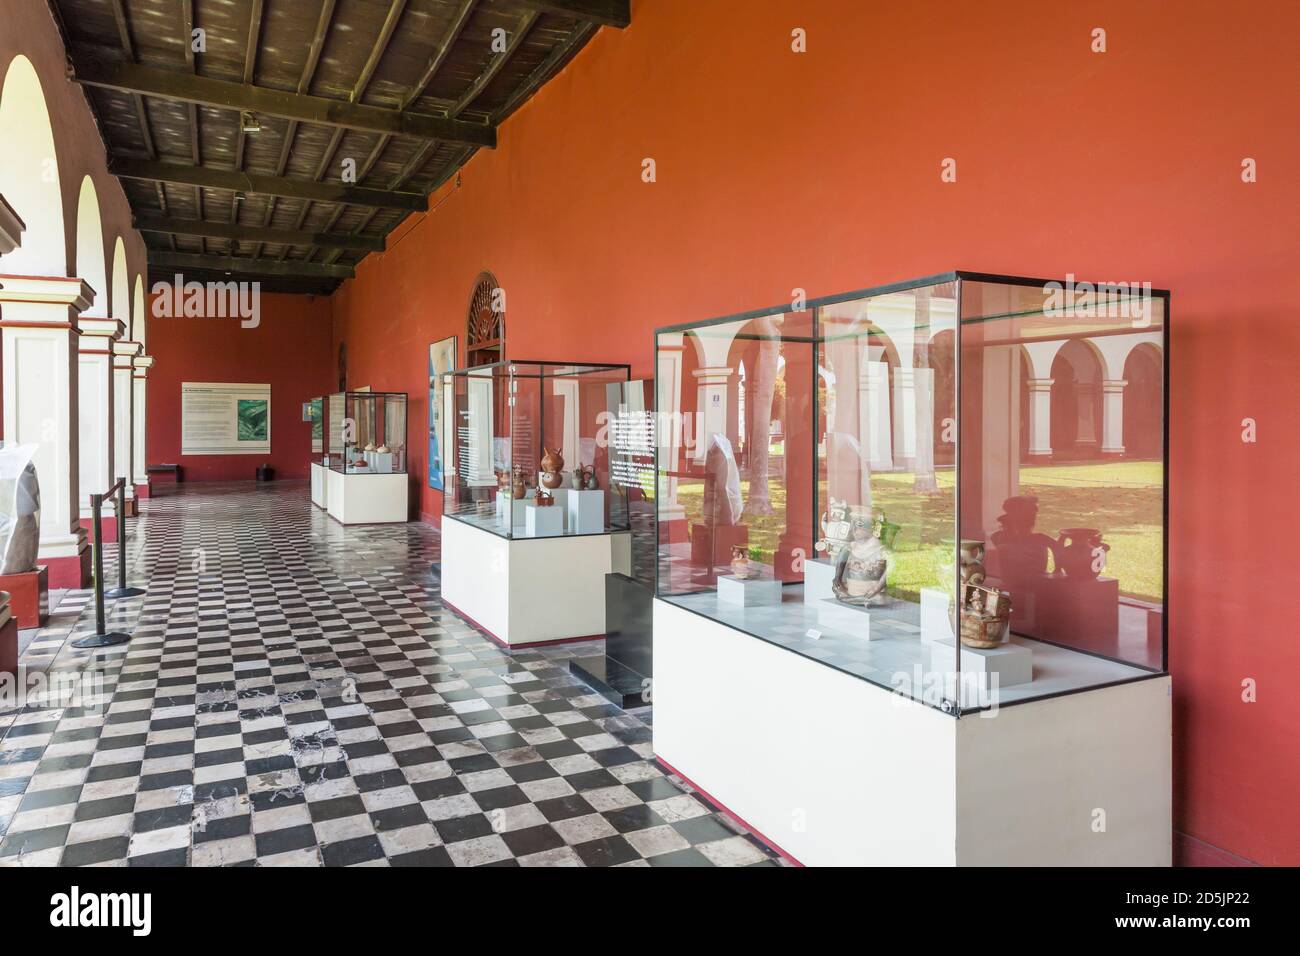 Exhibitions at cloister of courtyard, 'National Museum of Archaeology, Anthropology and History of Peru', Lima, Peru, South America Stock Photo